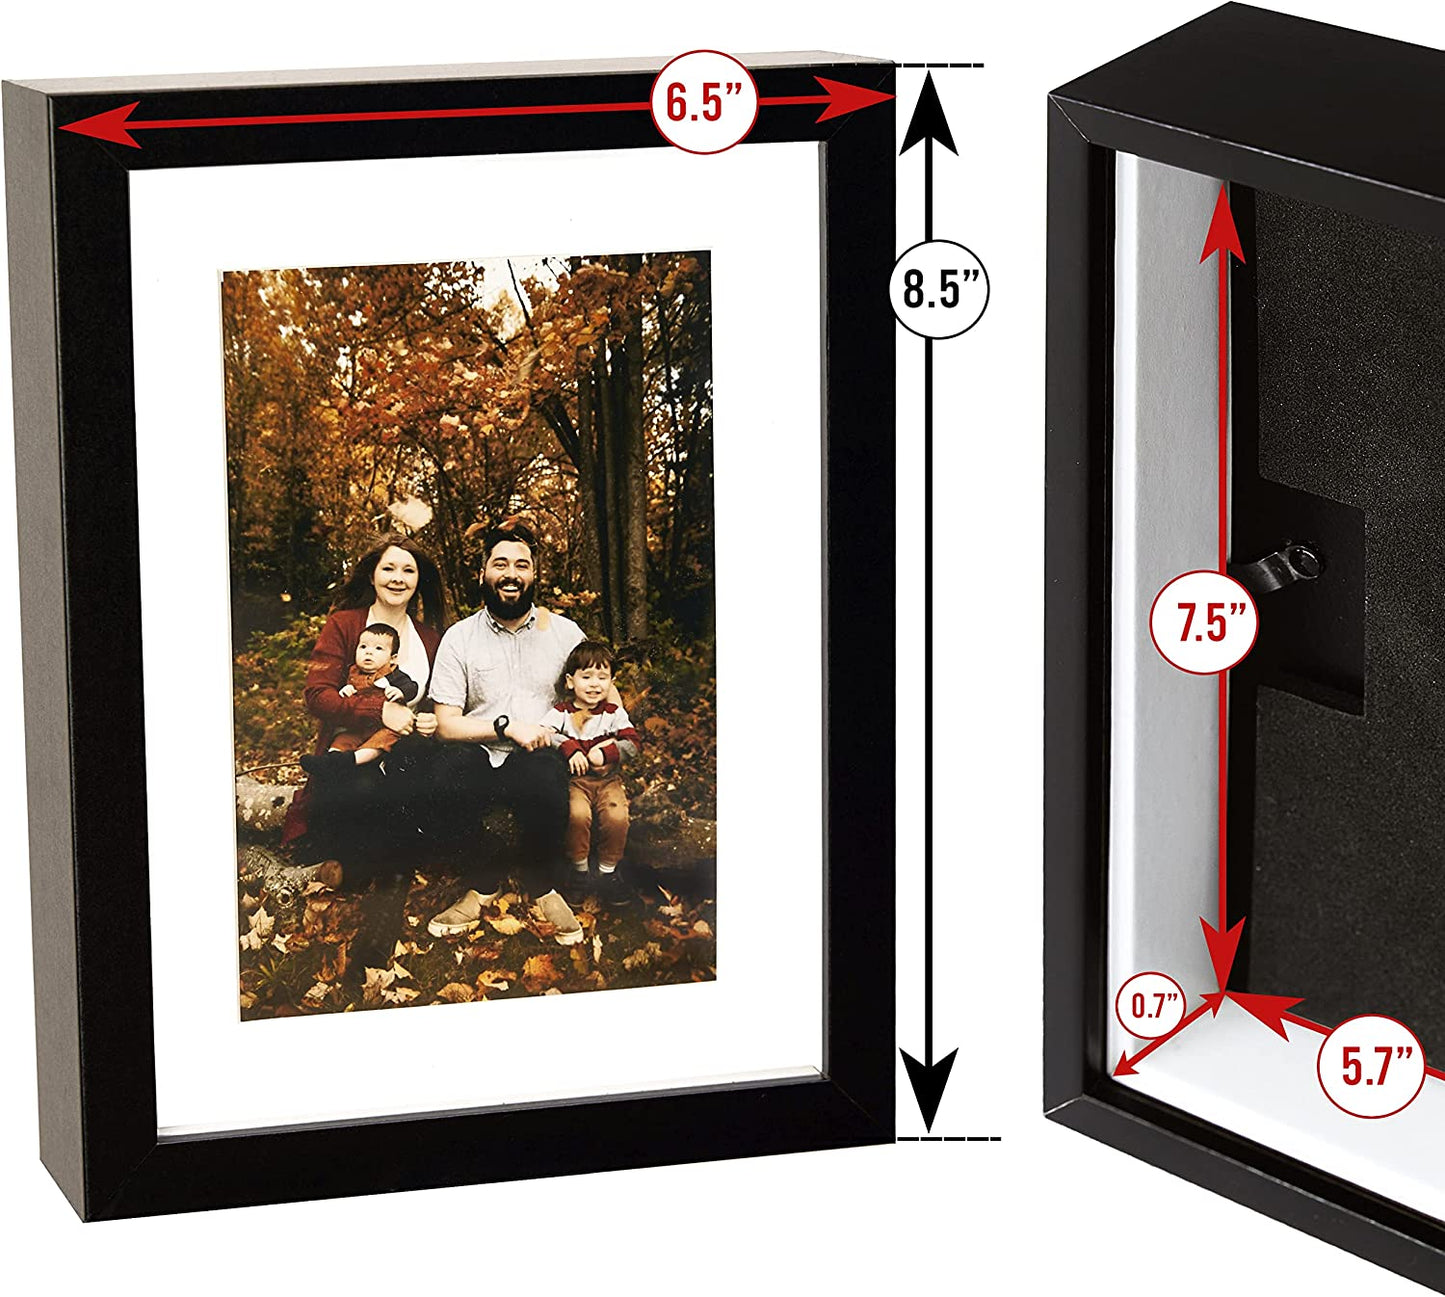 Photo Picture Frame Diversion Safe – Mini Safe Box with Hidden Secret Compar ent to store your Money, Cash, Jewelry or Herbs. Perfect for Home Security. (4X6, Black)